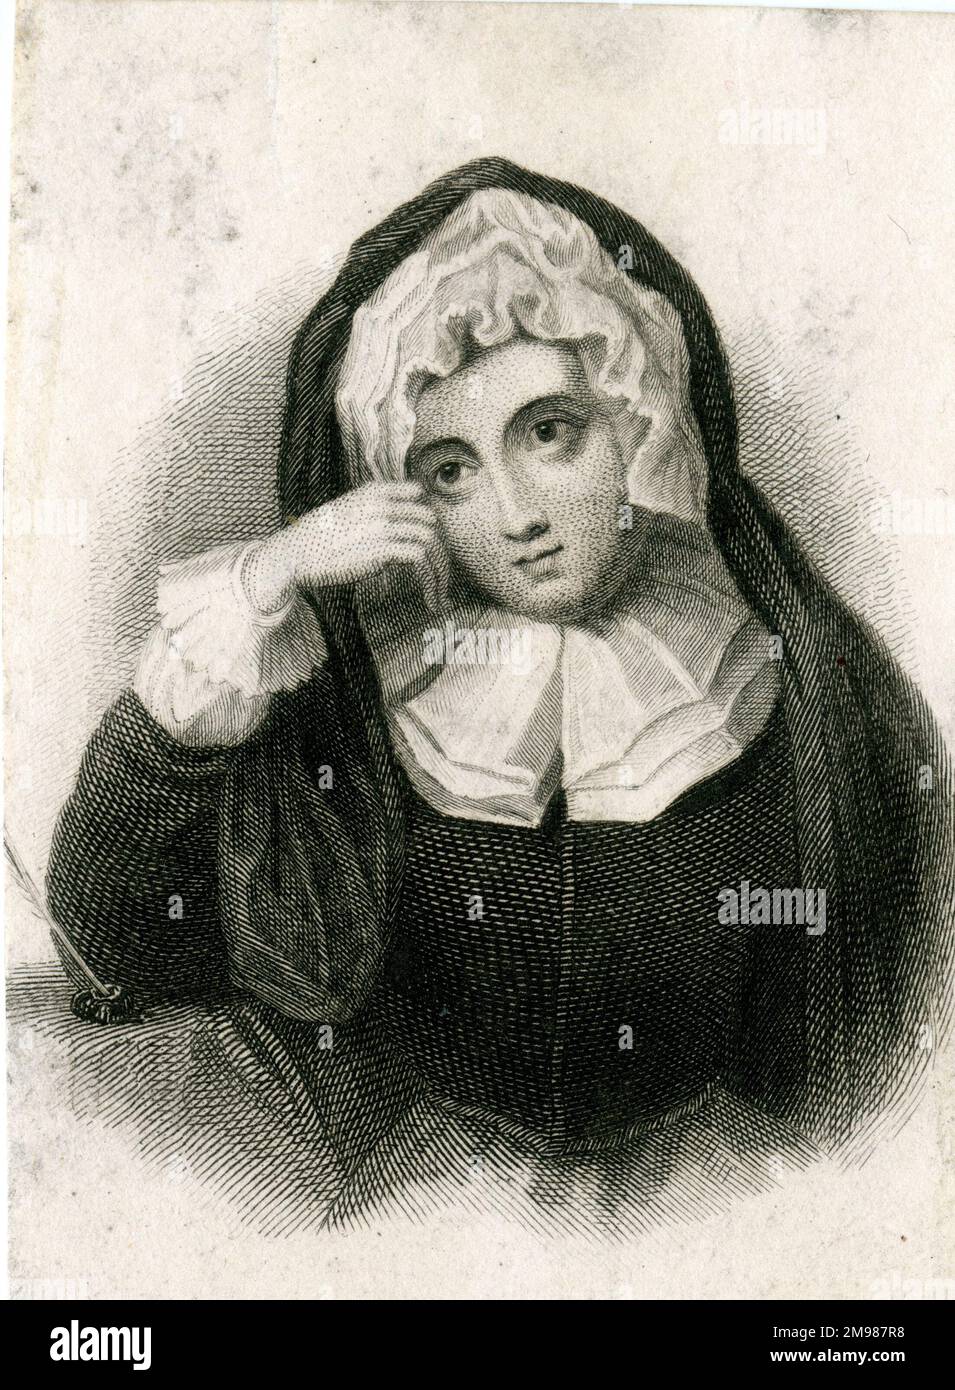 Rachel, Lady Russell (nee Wriothesley, 1636-1723), letter writer and author, wife of William, Baron Russell, who was executed for his part in the Rye House Plot of 1683. Seen here dressed as a widow. Stock Photo